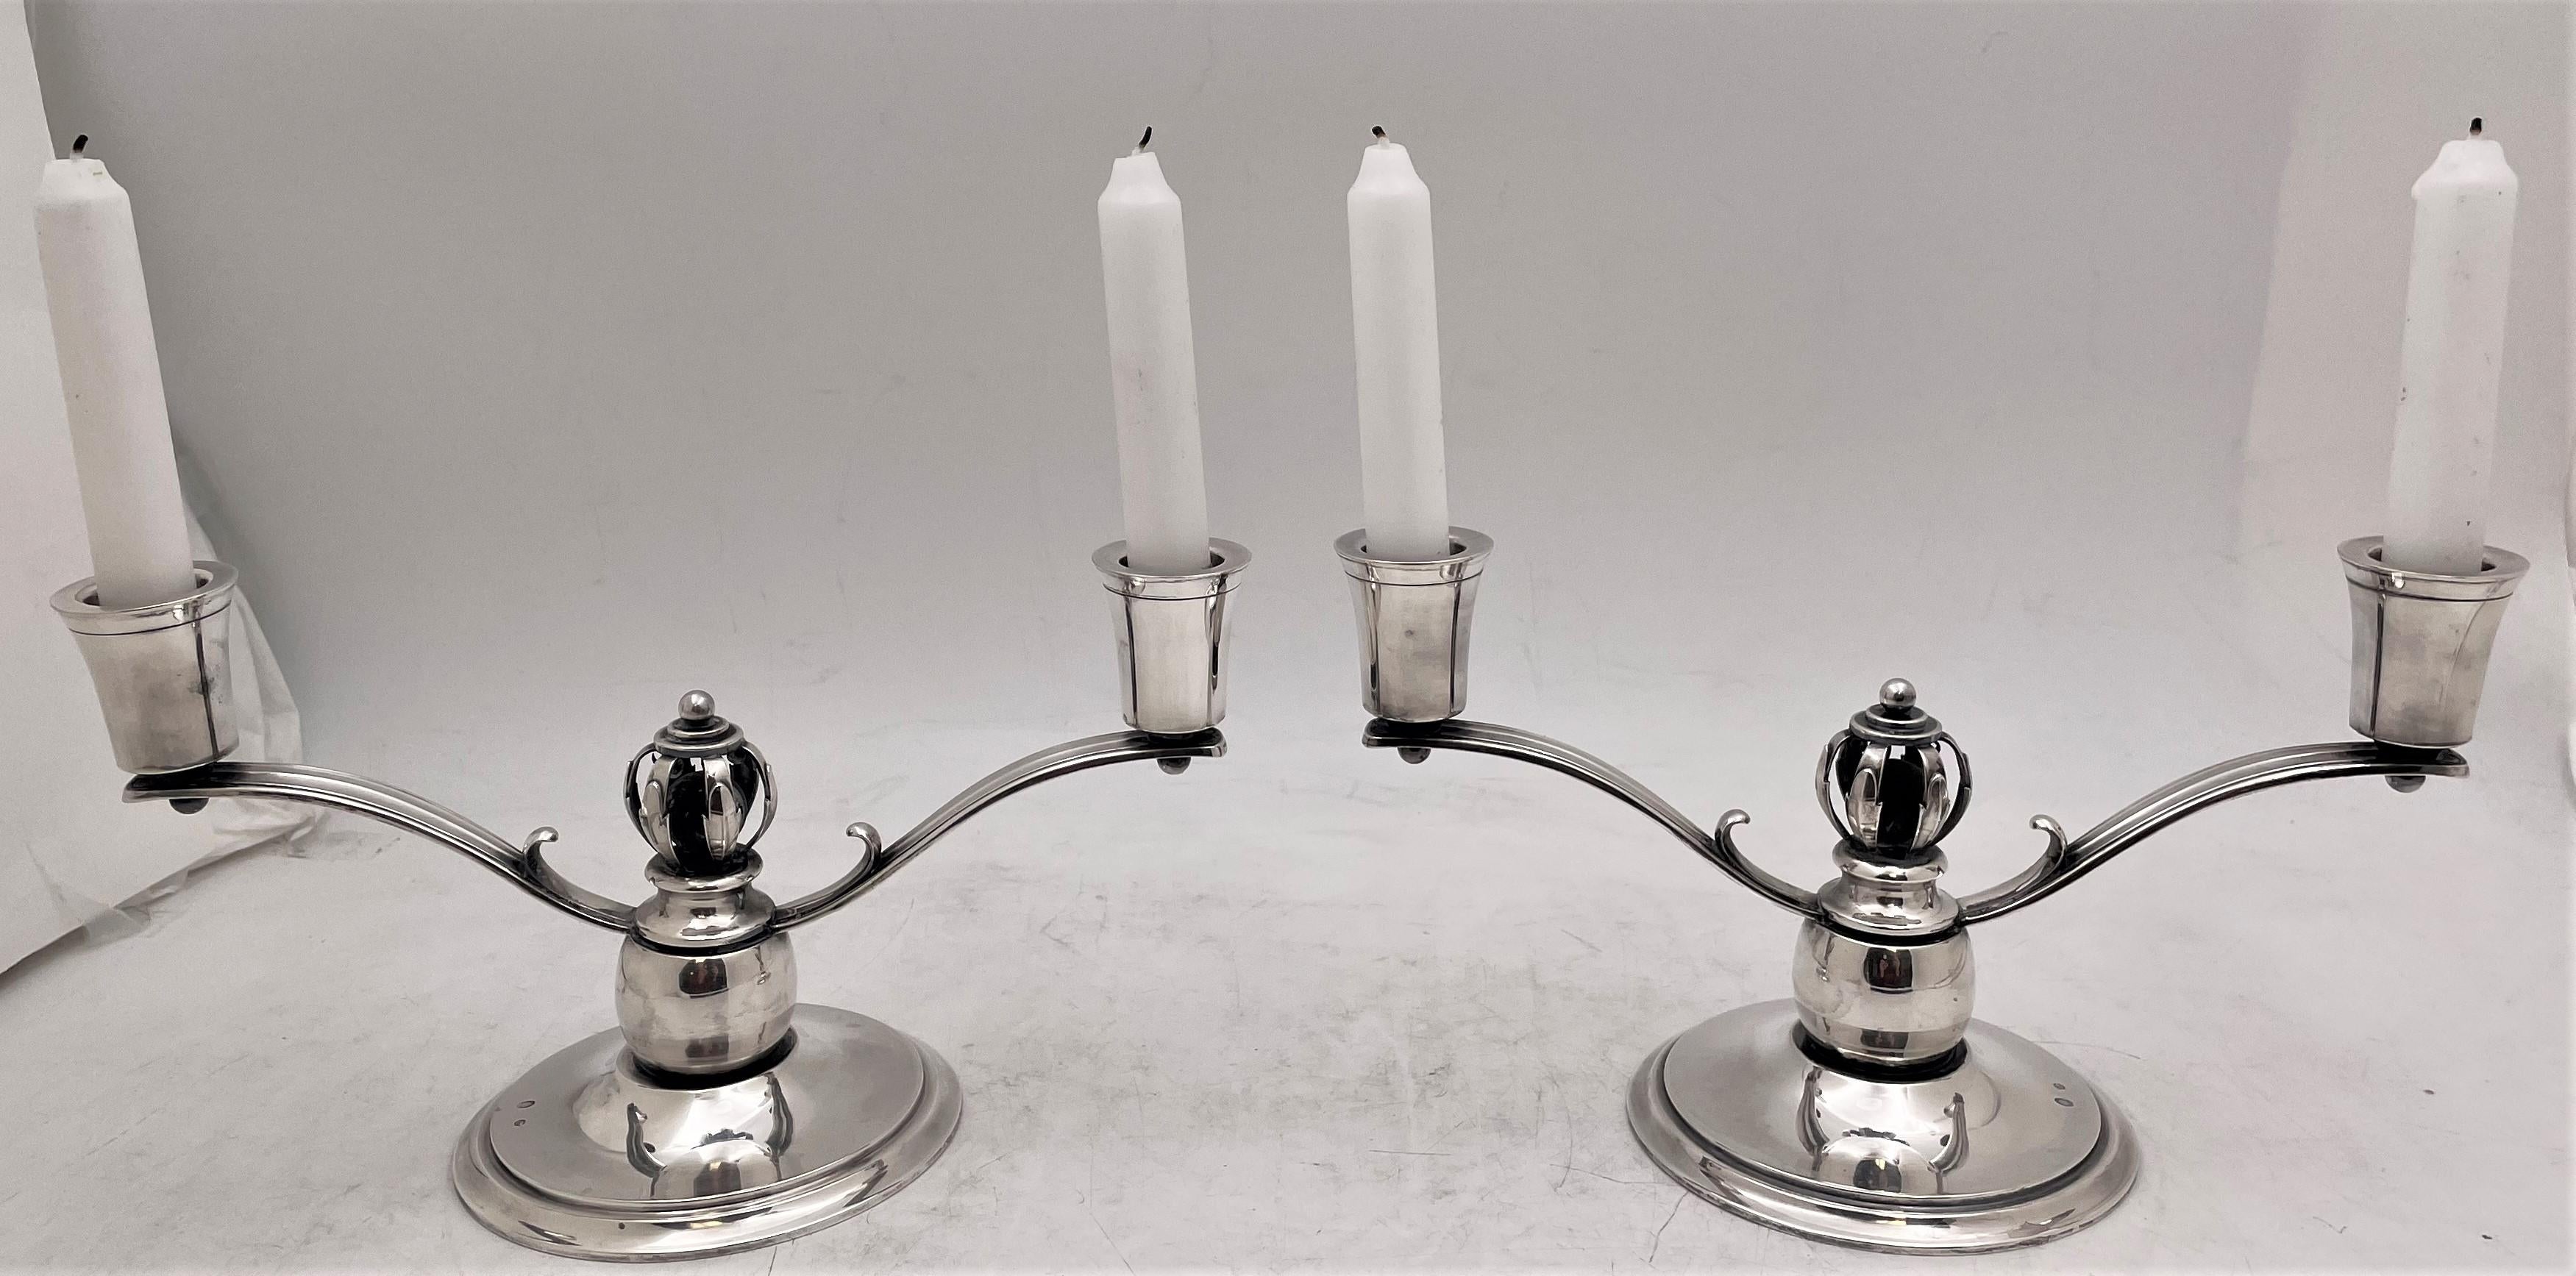 Danish silver 2-light candelabra or oil lamps in Georg Jensen, Mid-Century Modern style with an elegant, geometrically inclined style. Each measures 10 1/4'' in length by 4 1/2'' in depth by 5 1/2'' in height. Total weight is 24 troy ounces.